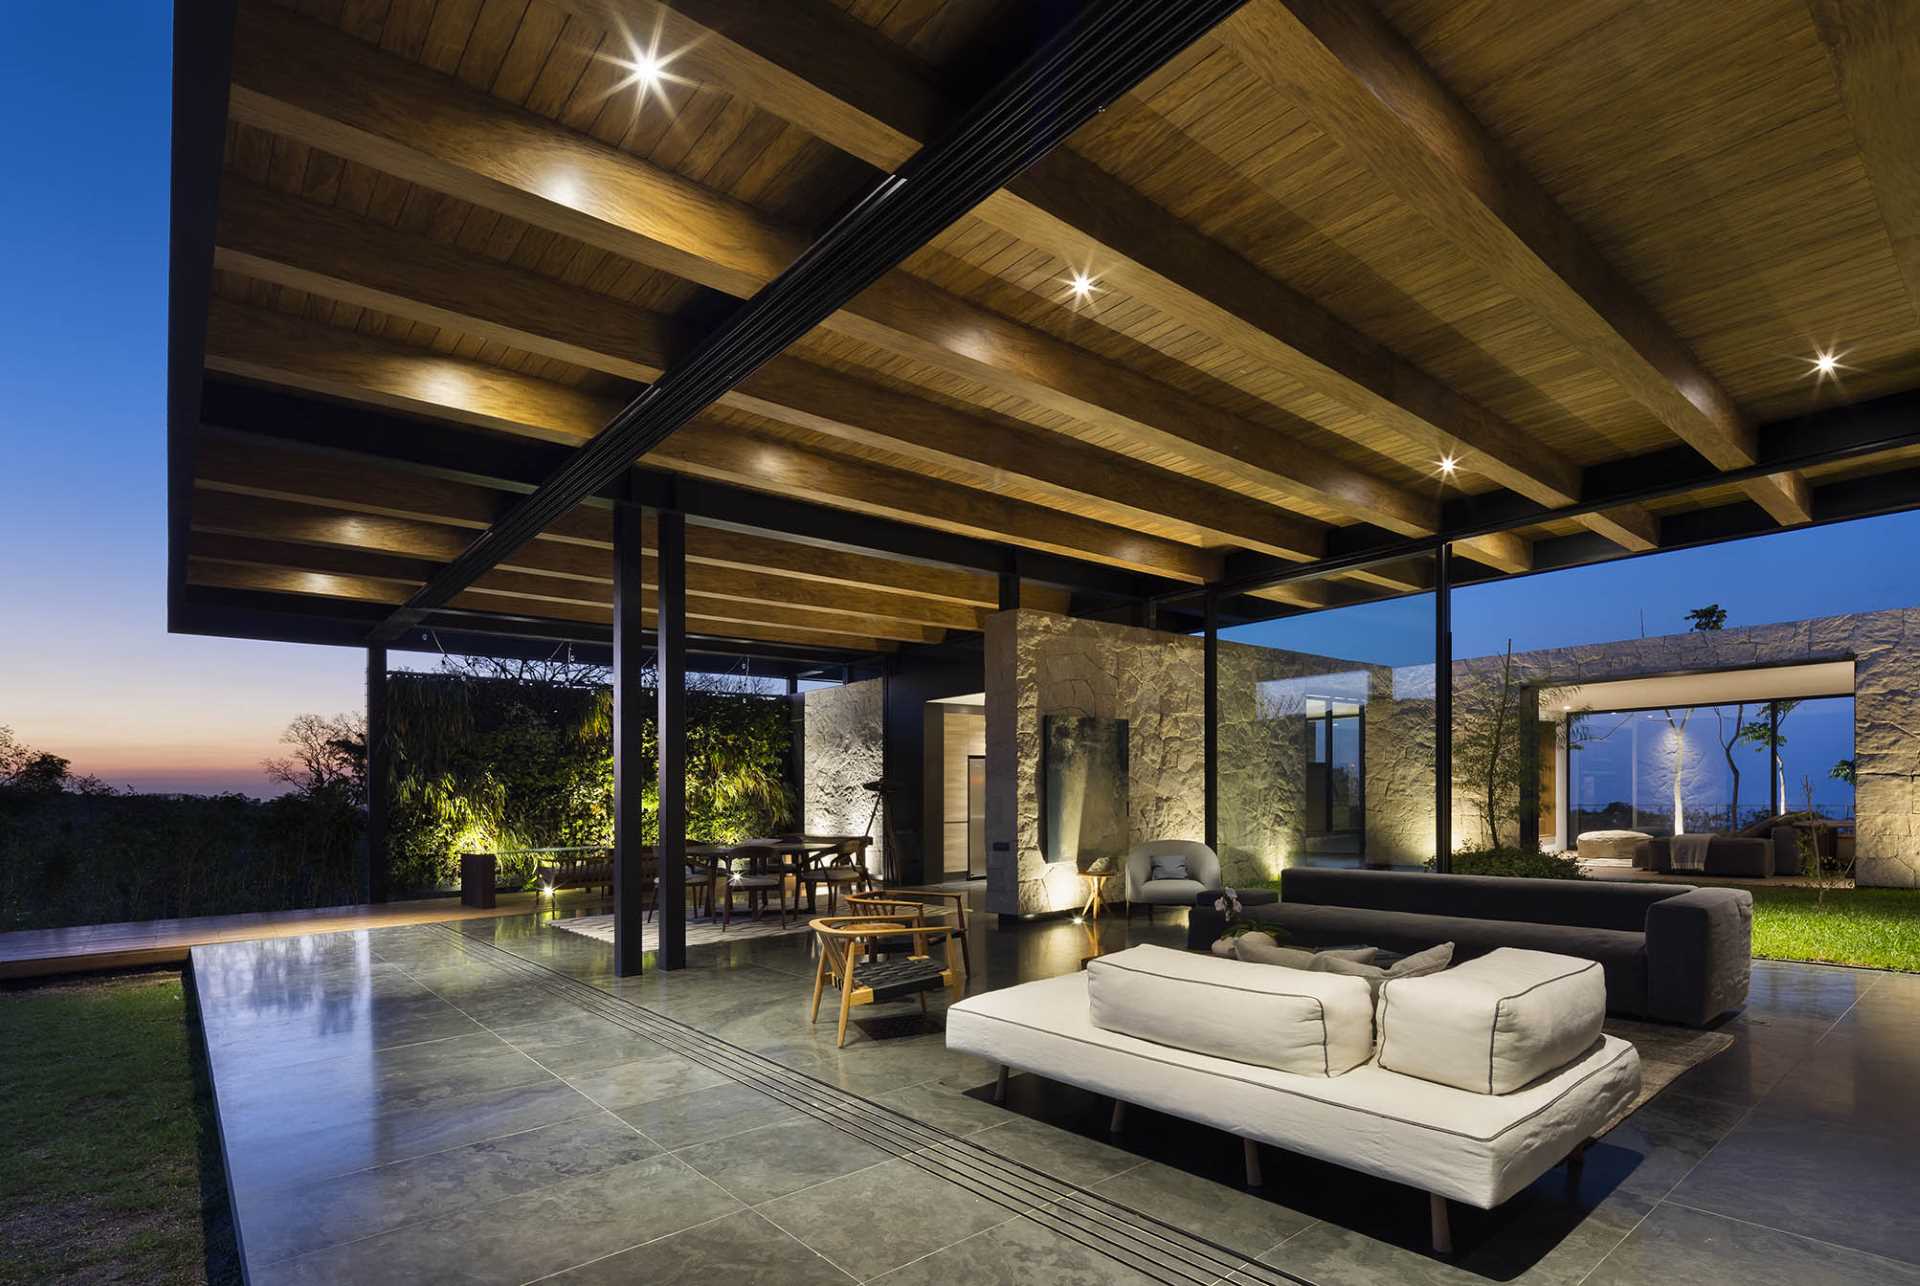 A modern living room with exposed structural elements, that opens to the outdoors and swimming pool.